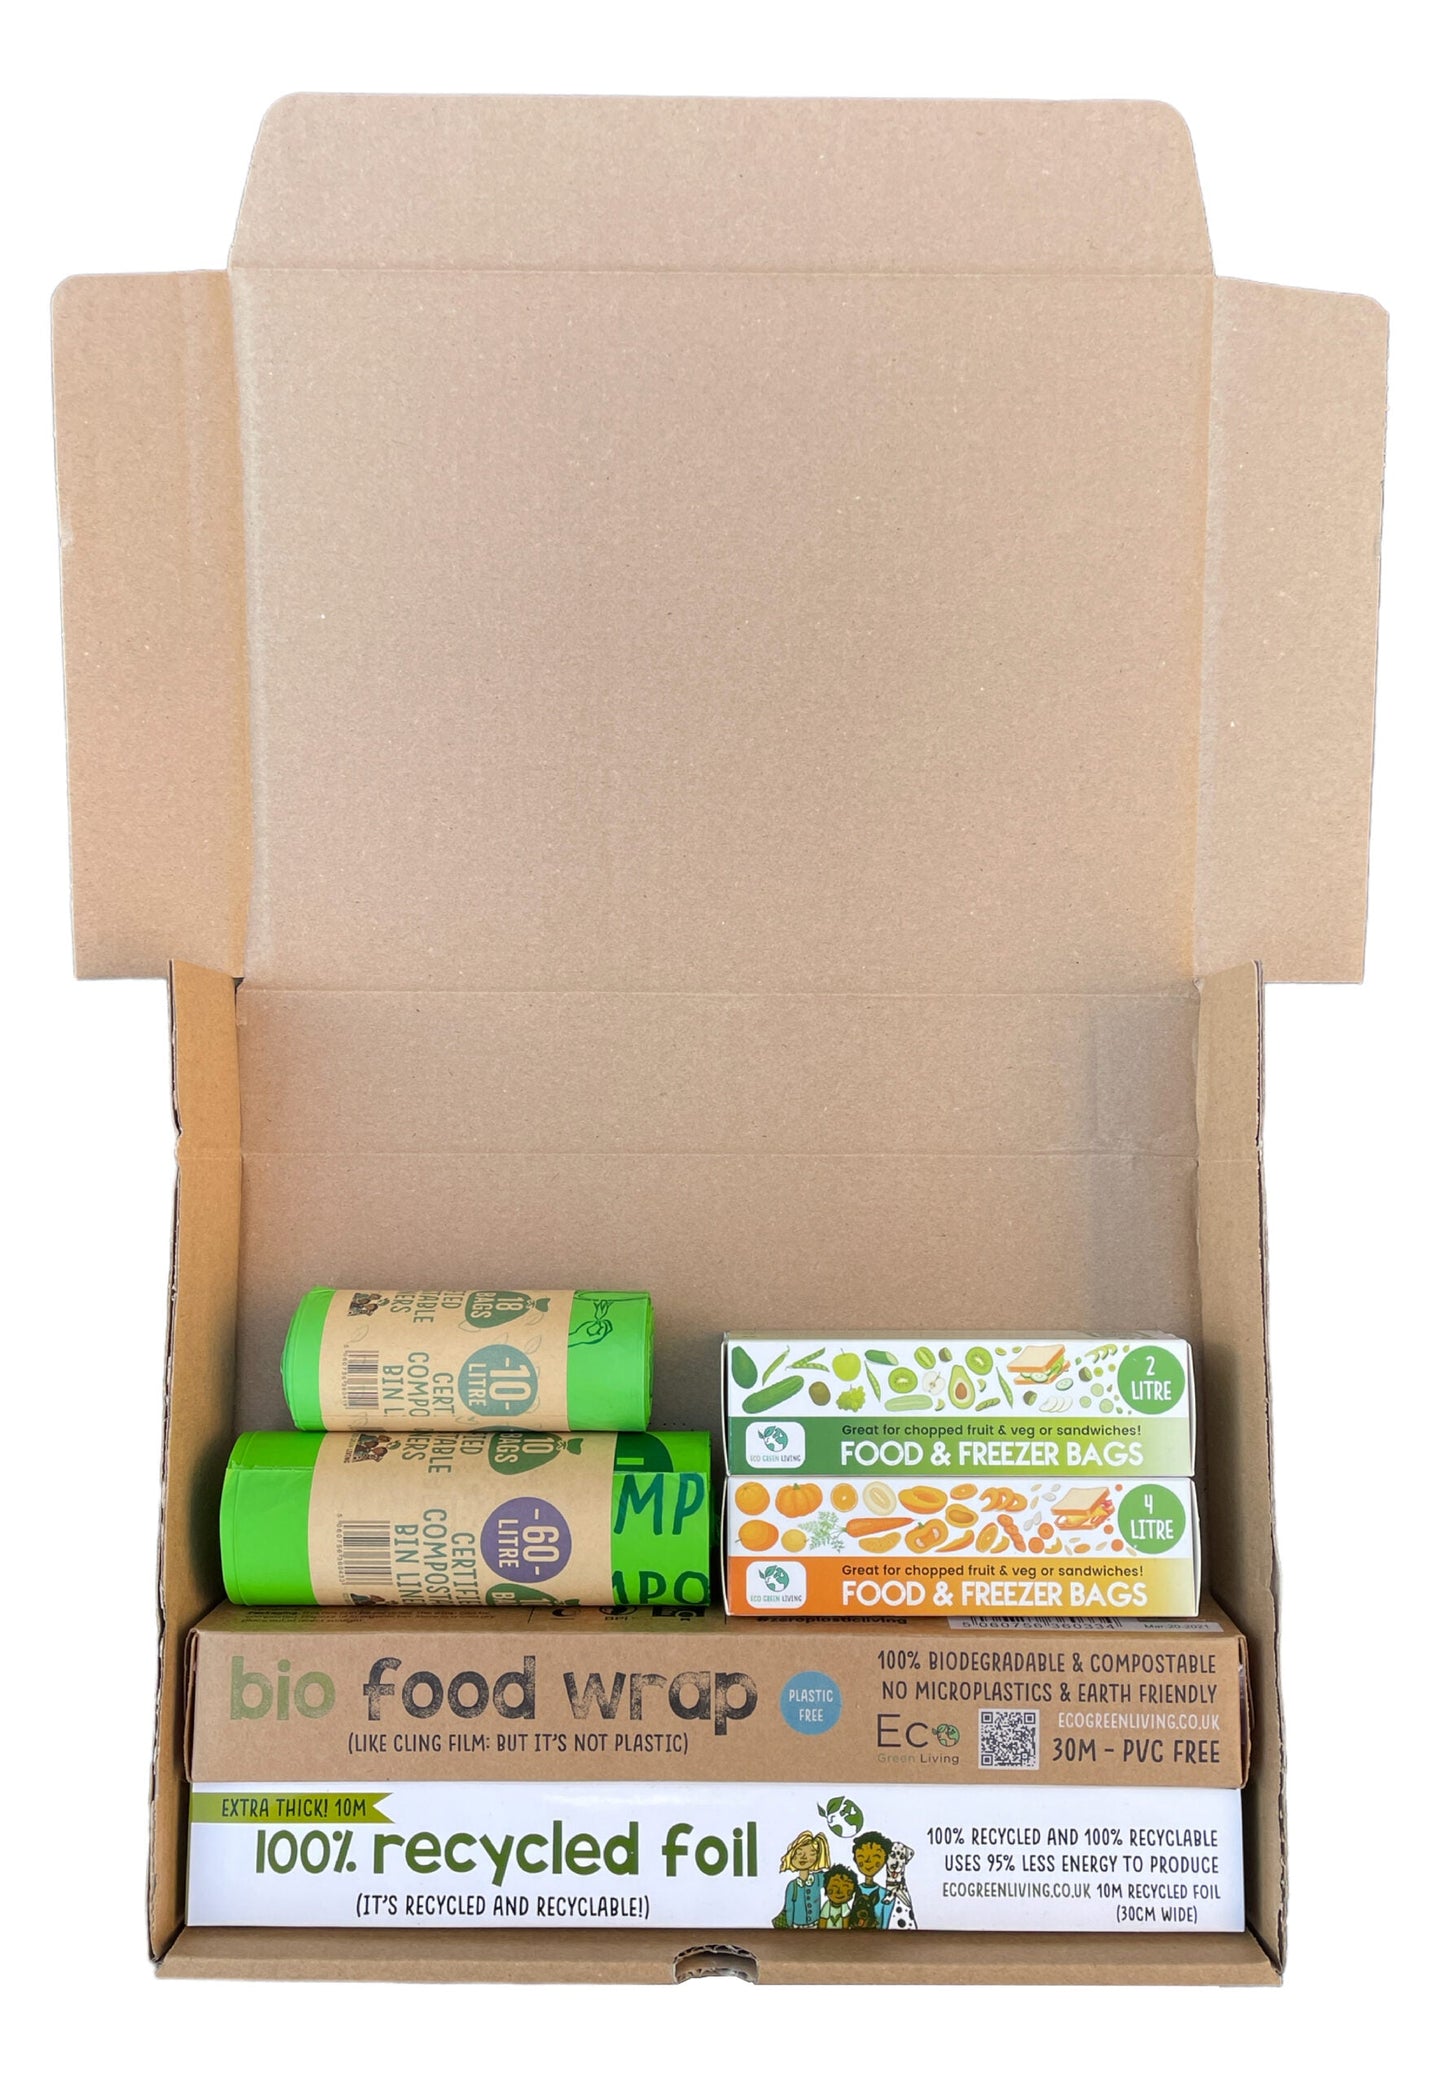 Eco Kitchen Swap-Out Pack Subscription - 10L and 60L Bags, Food and Freezer Bags - Eco Green Living